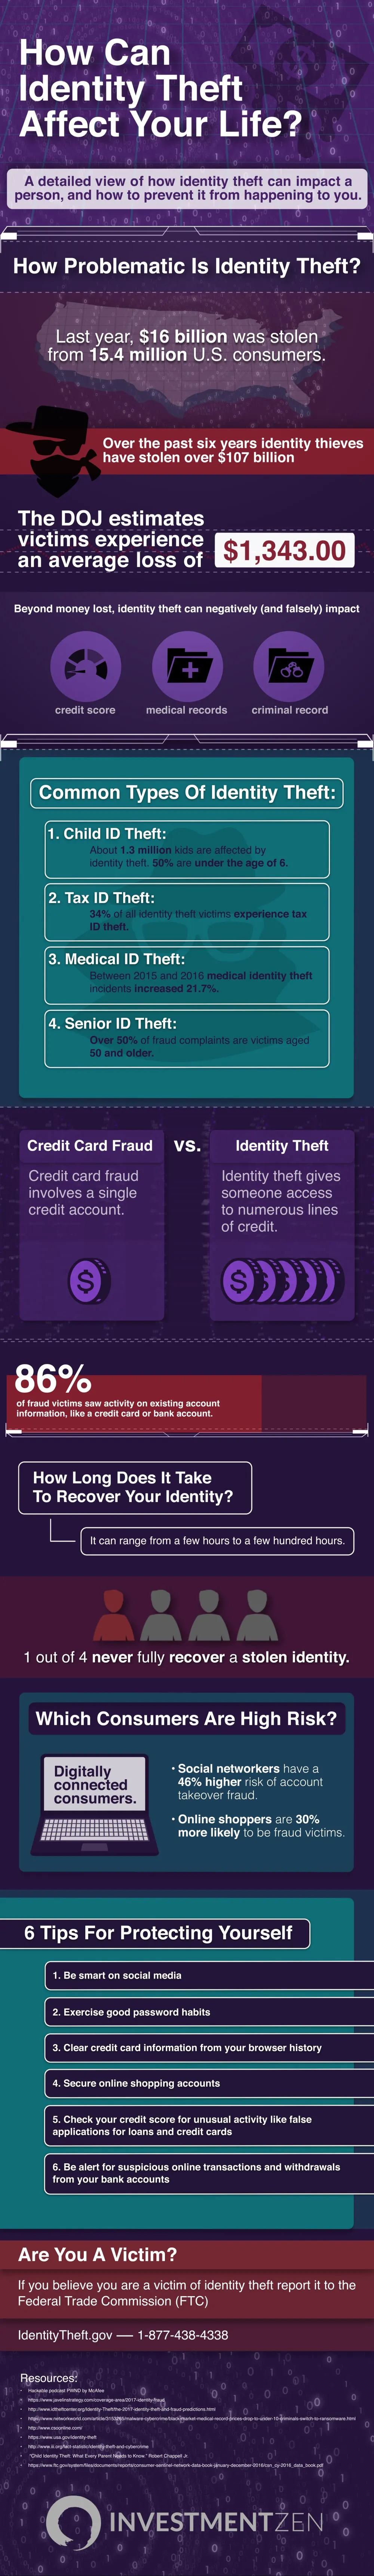 How Can Identity Theft Affect Your Life? - #infographic